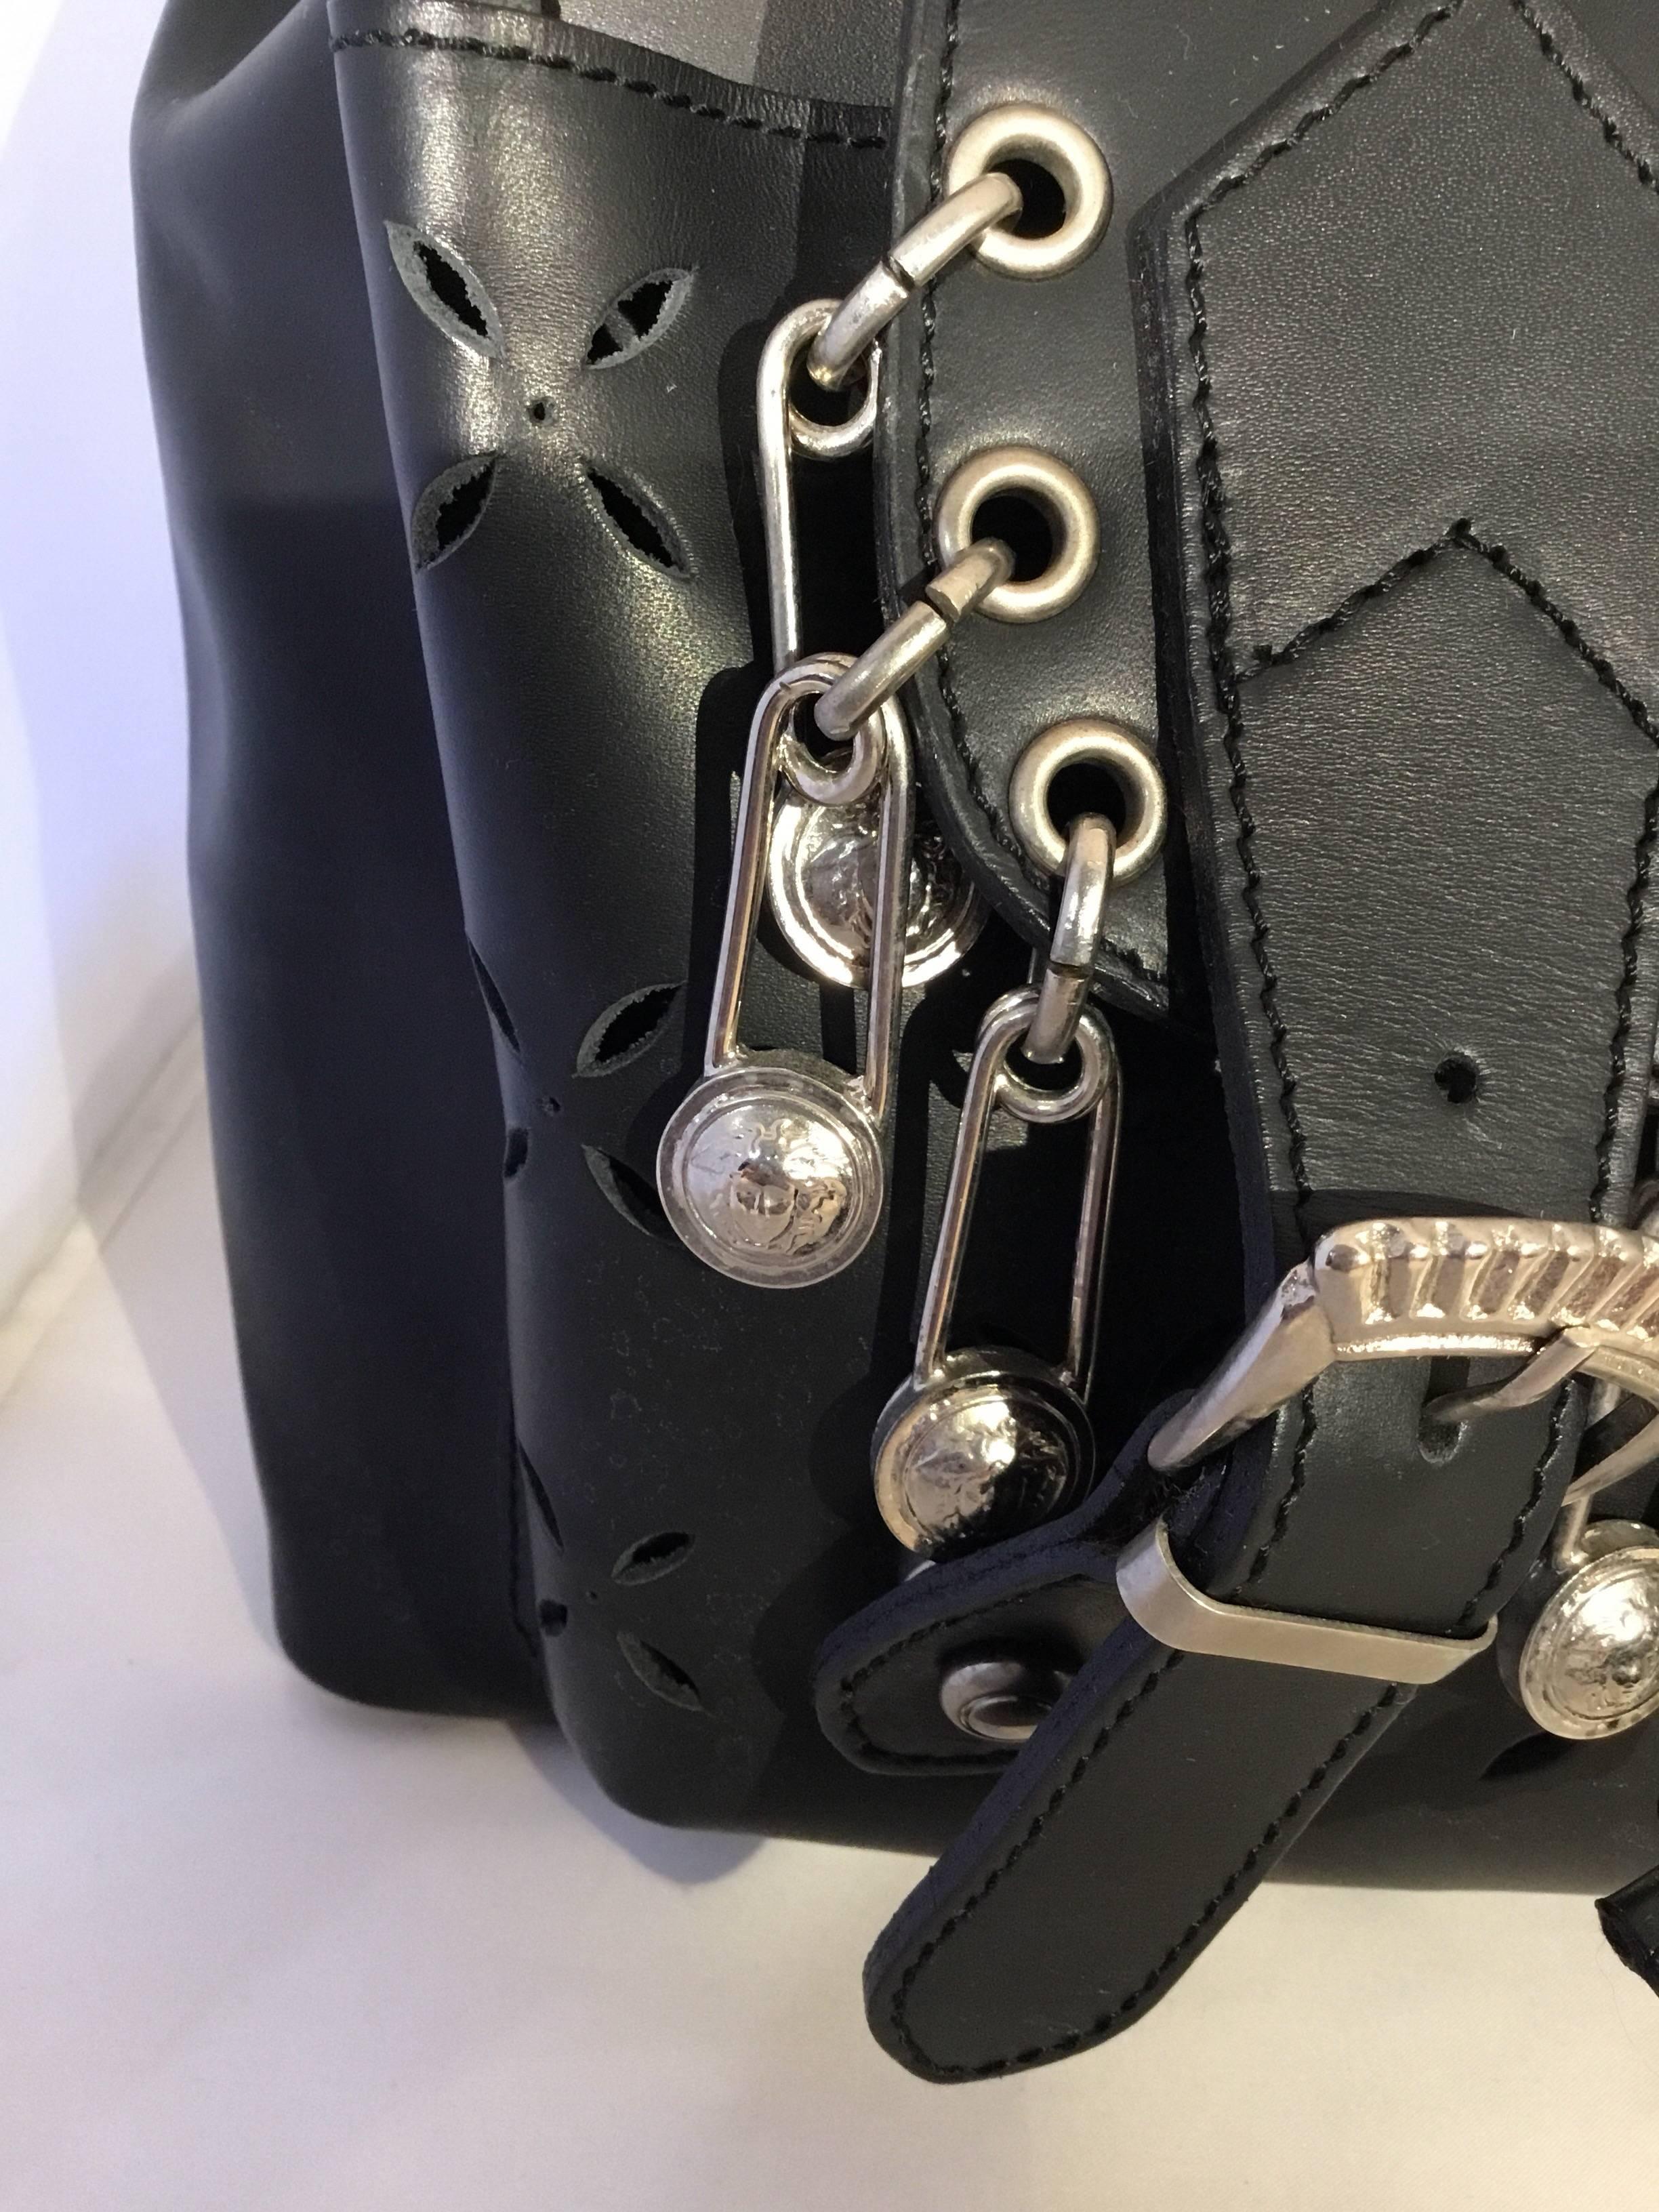 Gianni Versace Vegan? faux leather backpack features laser cut detailing, a flap closure with silver-tone rivets along the trim and dangling Medusa safety pins, flap closure also has decorative buckles in which are disguised as magnetic snap